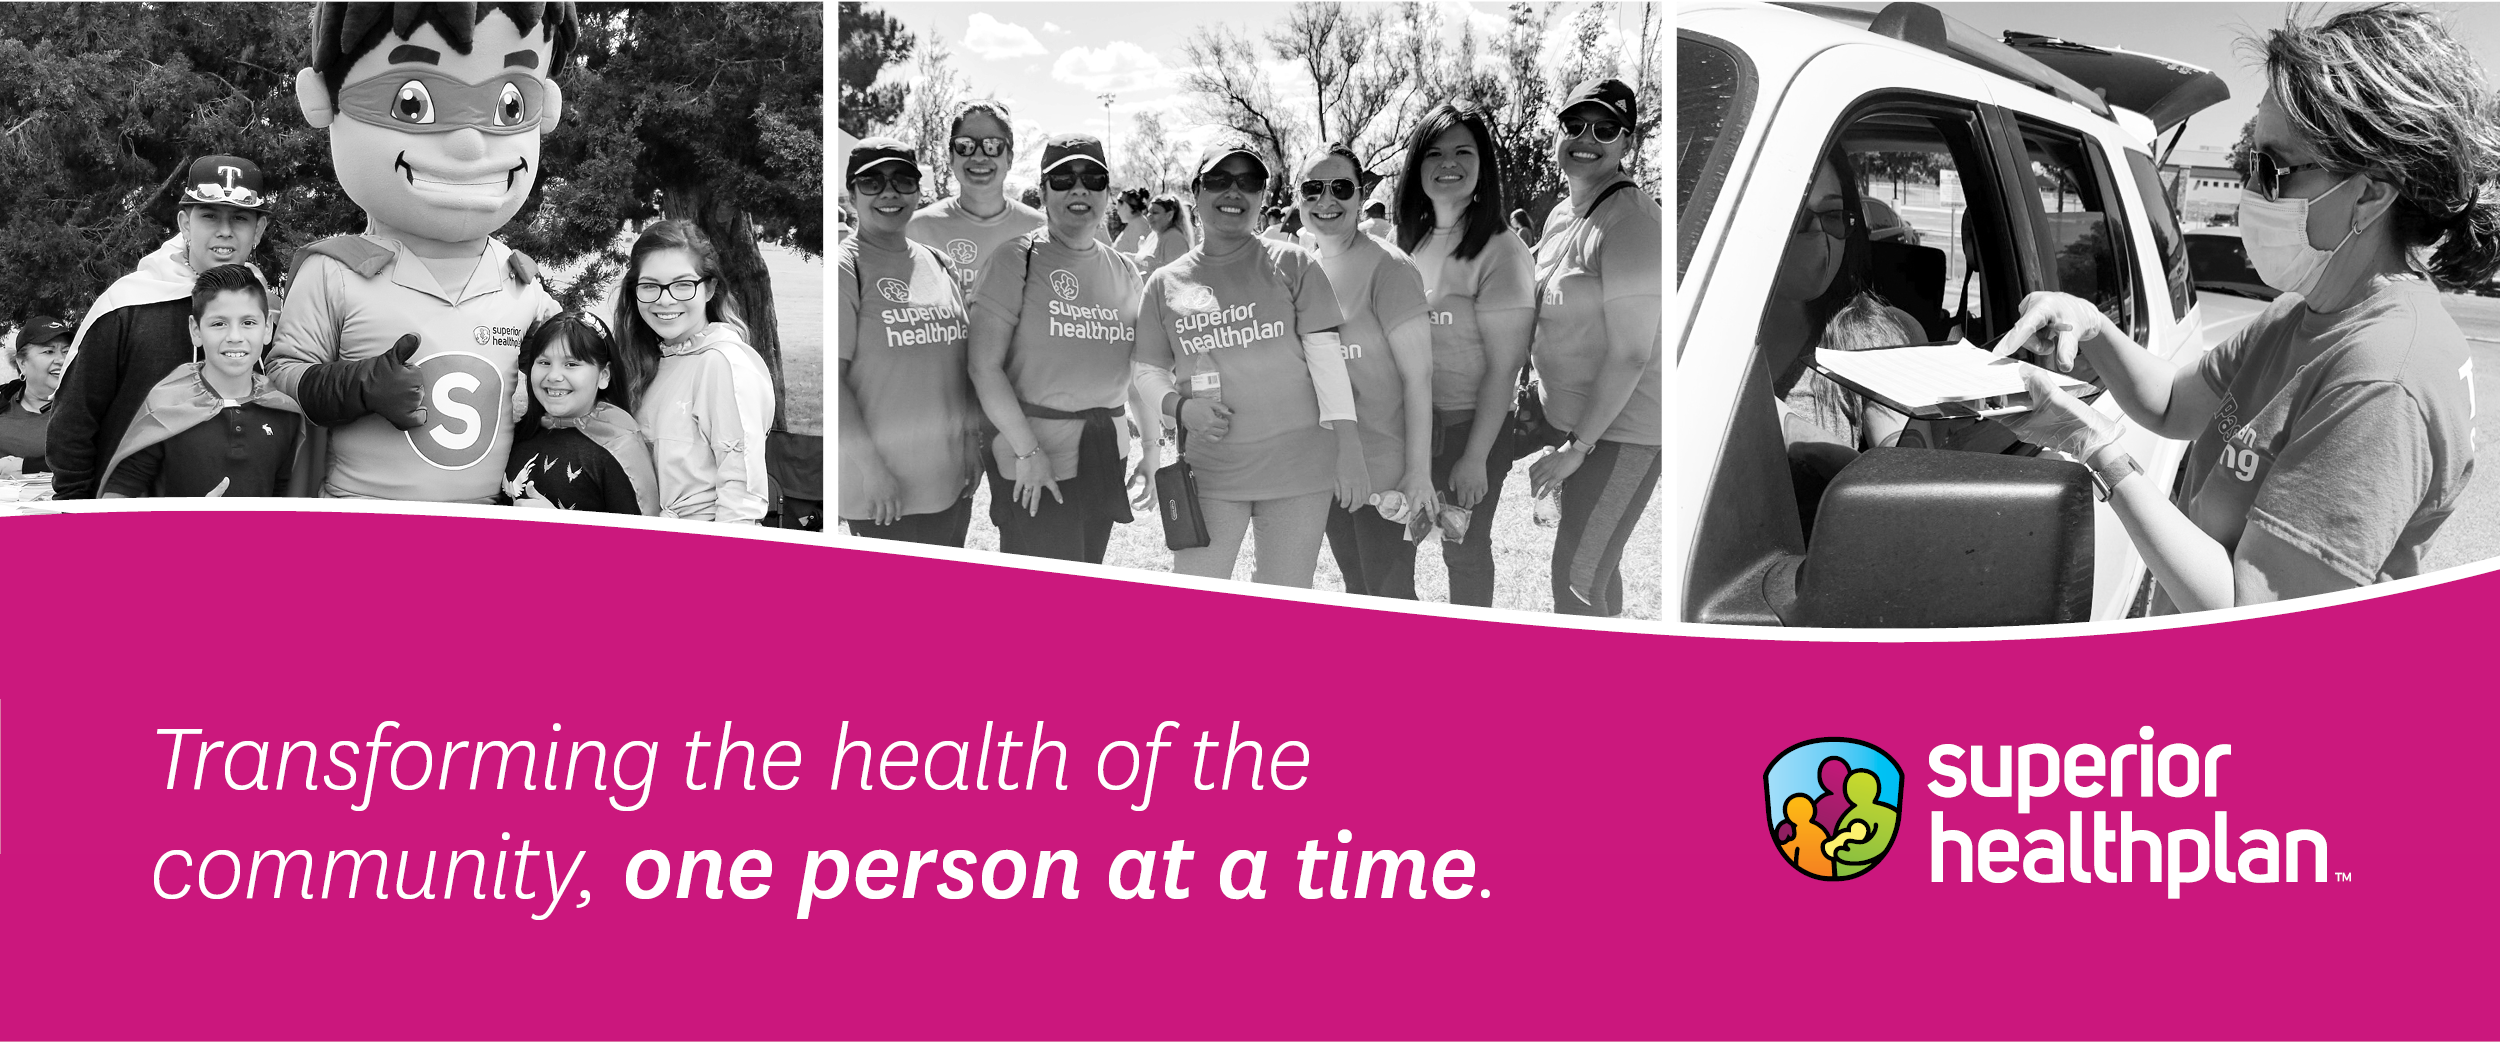 Three photos that include groups of people at an outdoor event for Superior HealthPlan. Text that reads Transforming the health of the community one person at a time